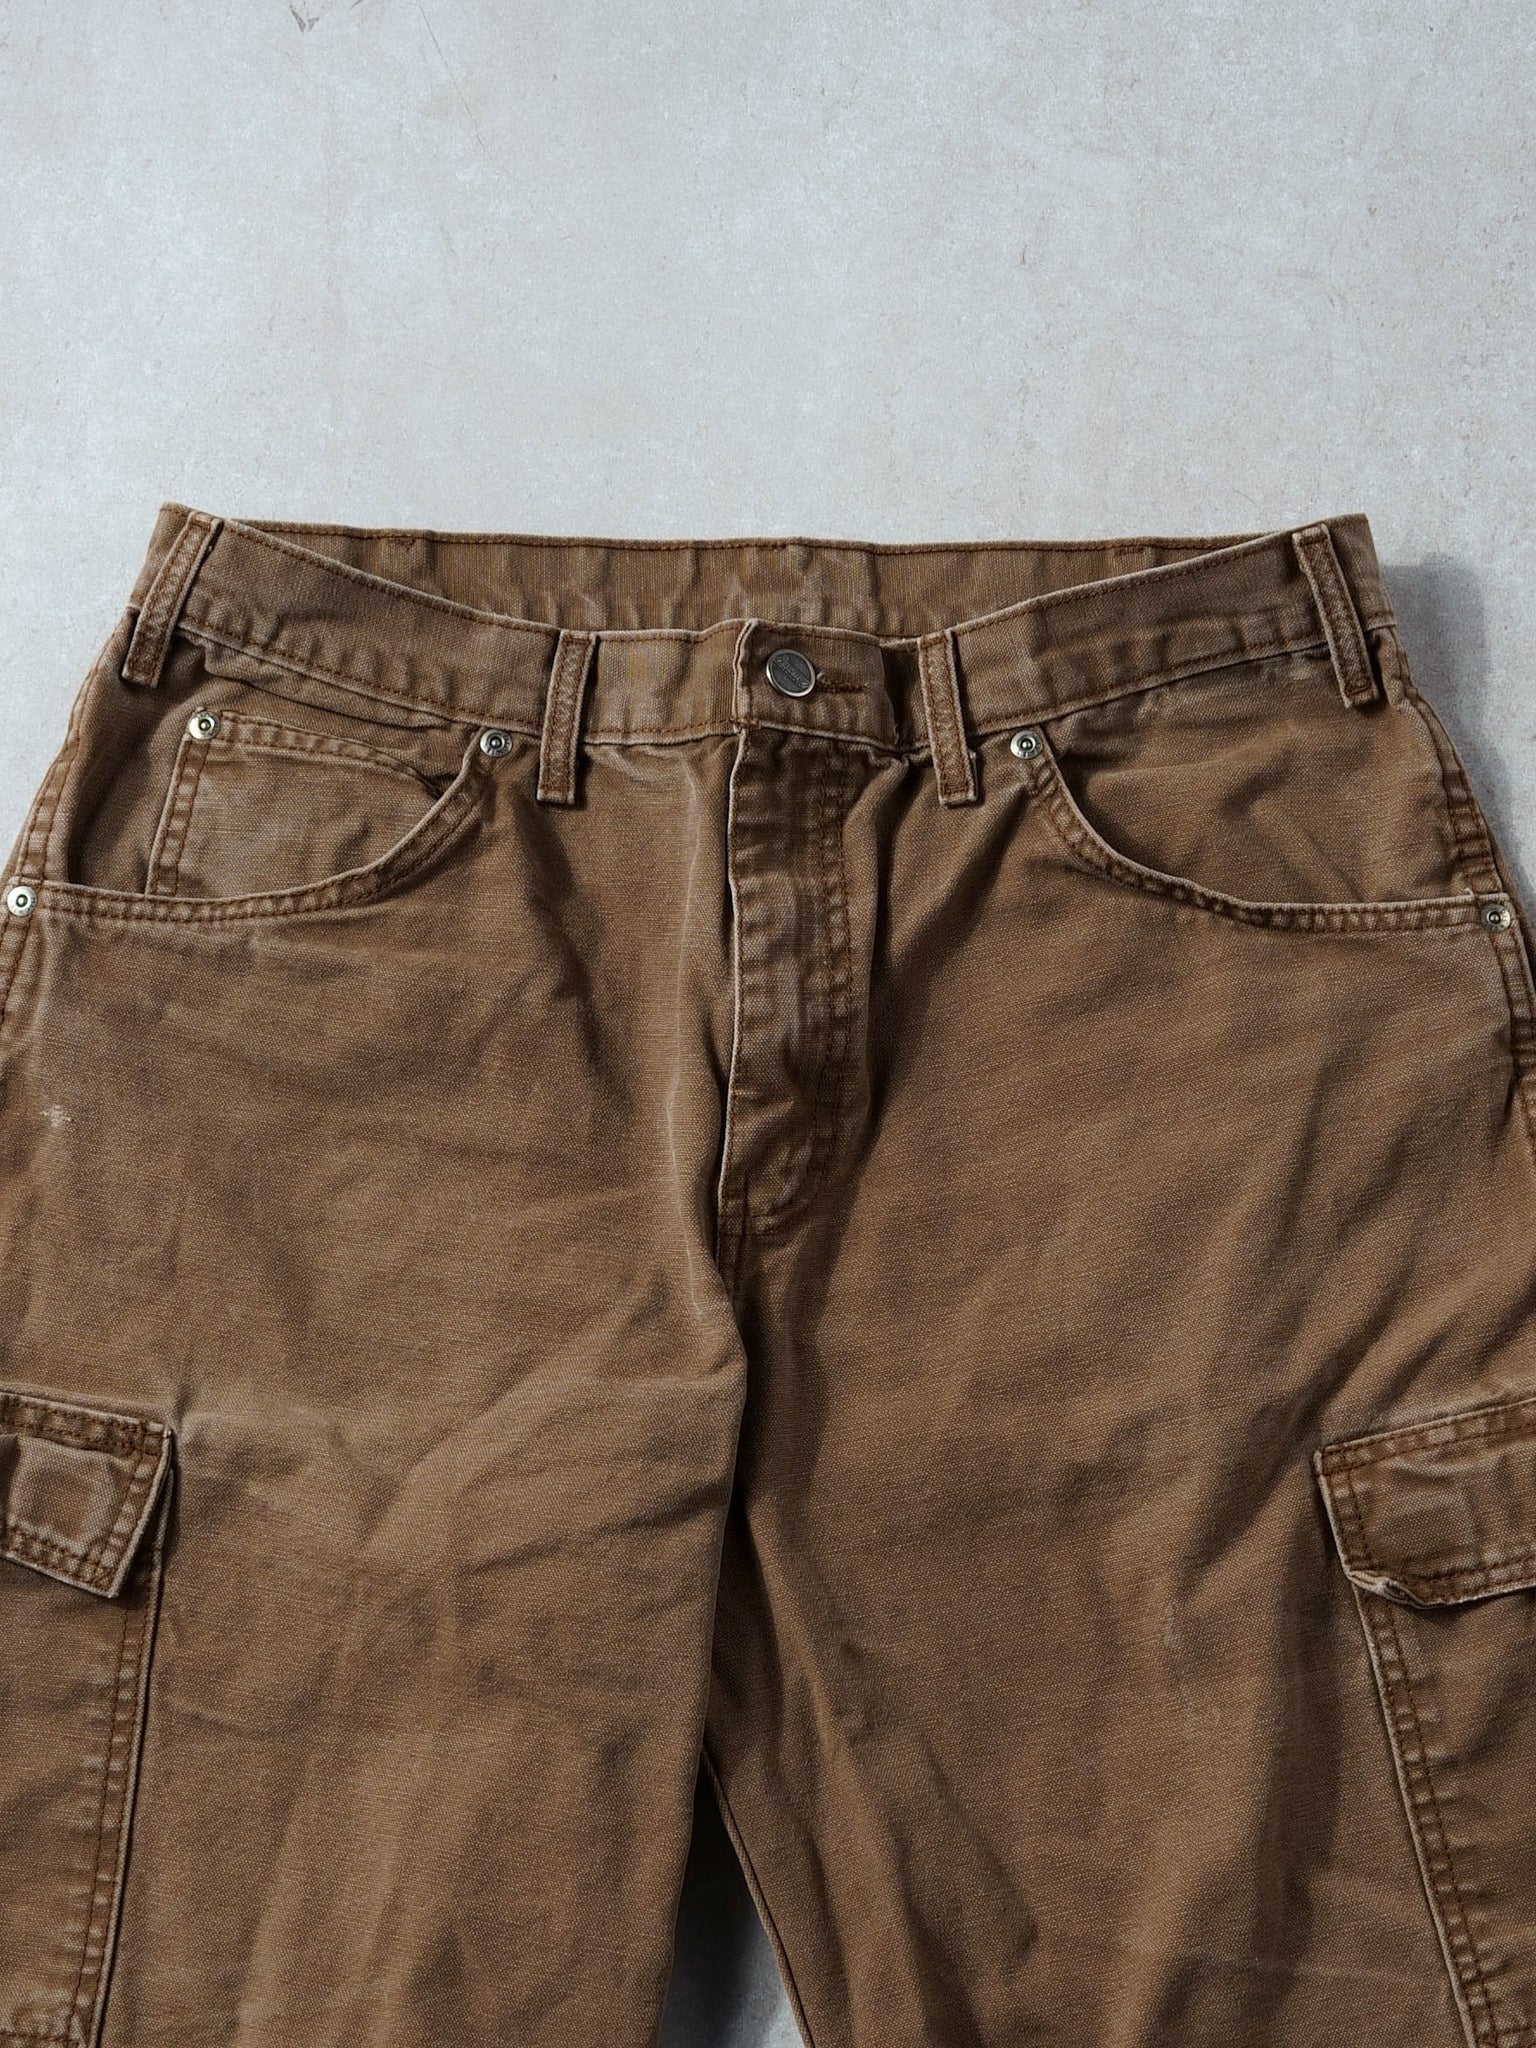 Vintage 90s Sun Faded Brown Dickies Cargo Shorts (34x13)